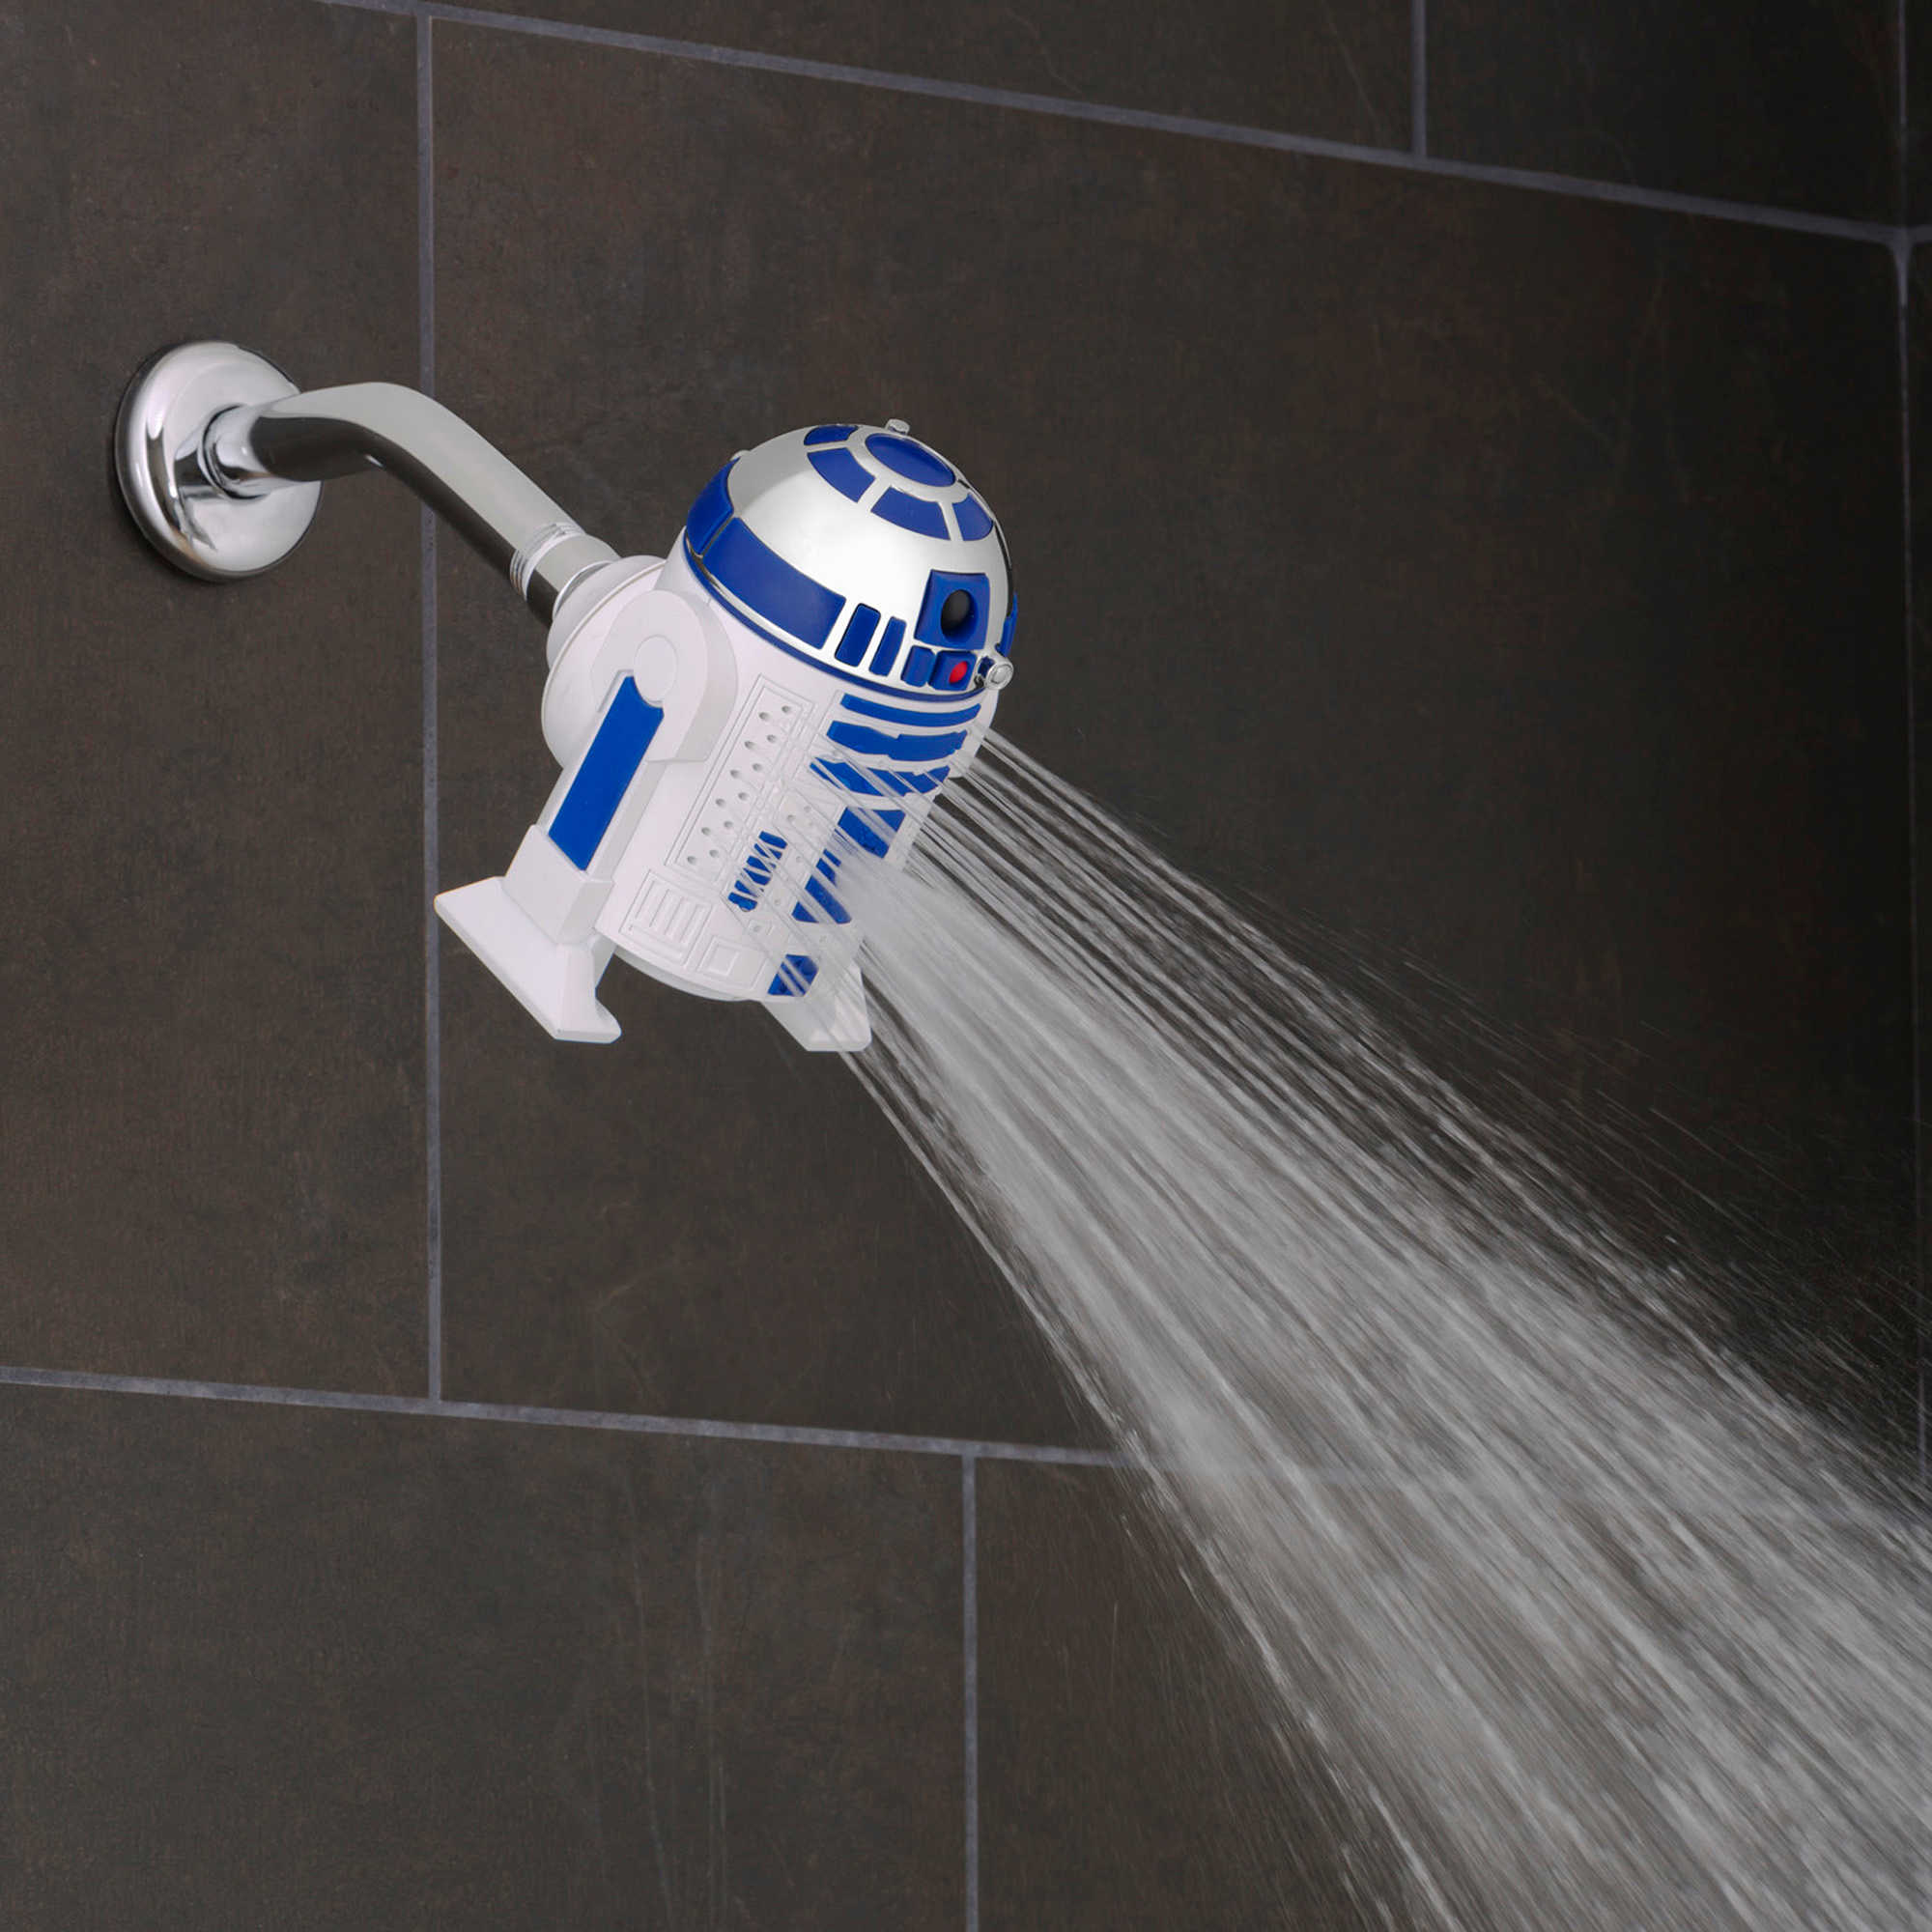 Bed, Bath and Beyond is officially selling the coolest shower heads we ...